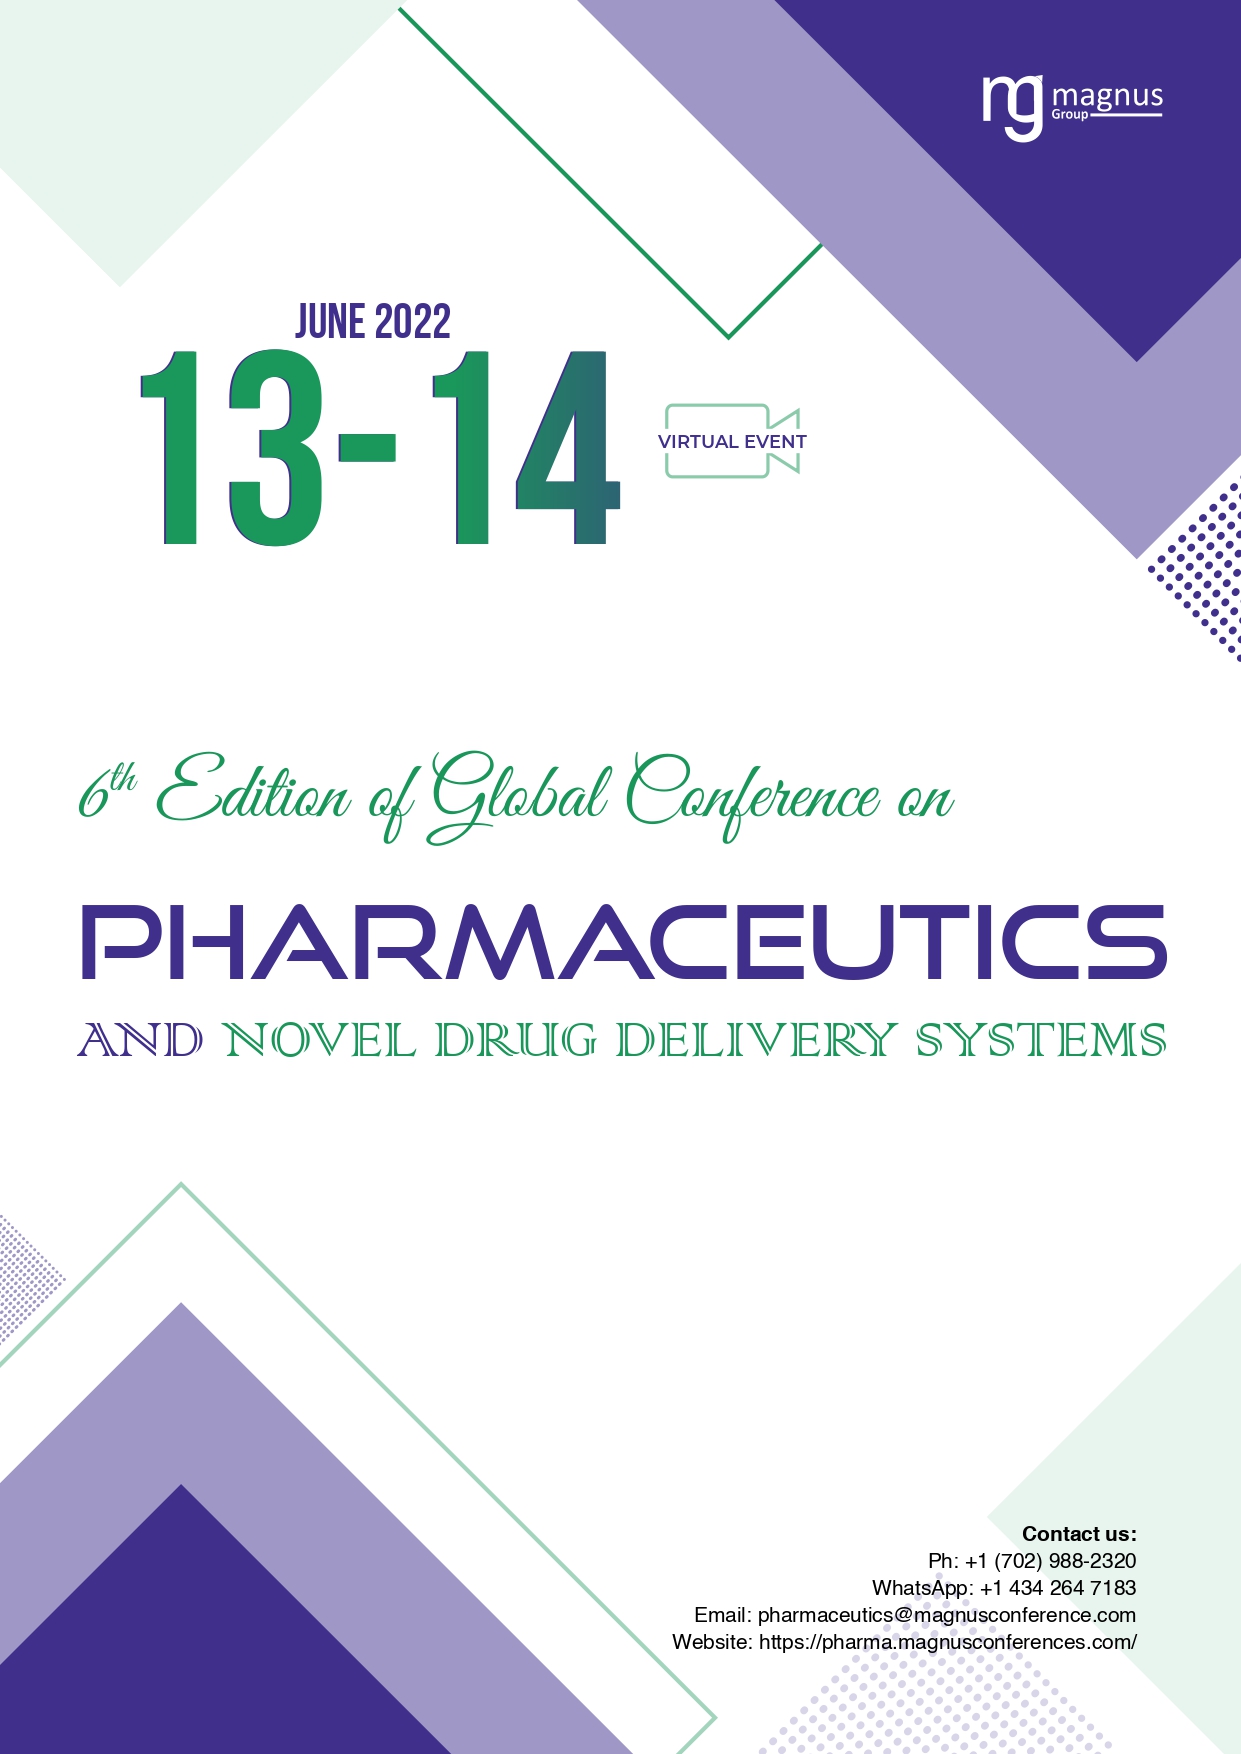 6th Edition of Global Conference on Pharmaceutics and Drug Delivery Systems Book